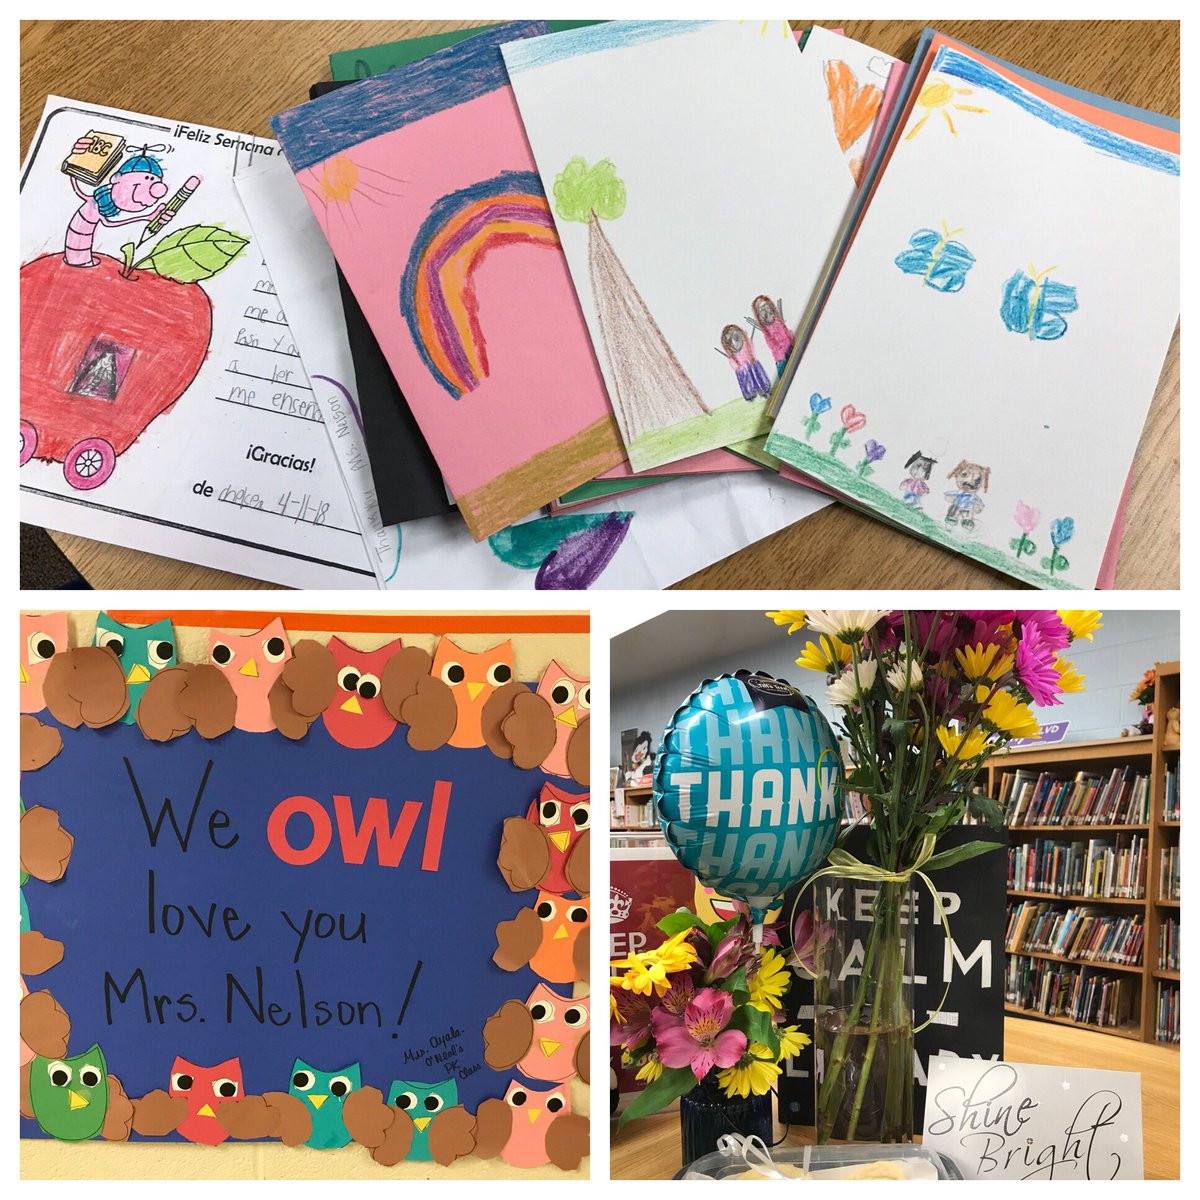 Thank you @OdomEagles for all of the lovely cards, flowers, and gifts of appreciation!! #Grateful #LibrarianAppreciation #AISDGot❤️